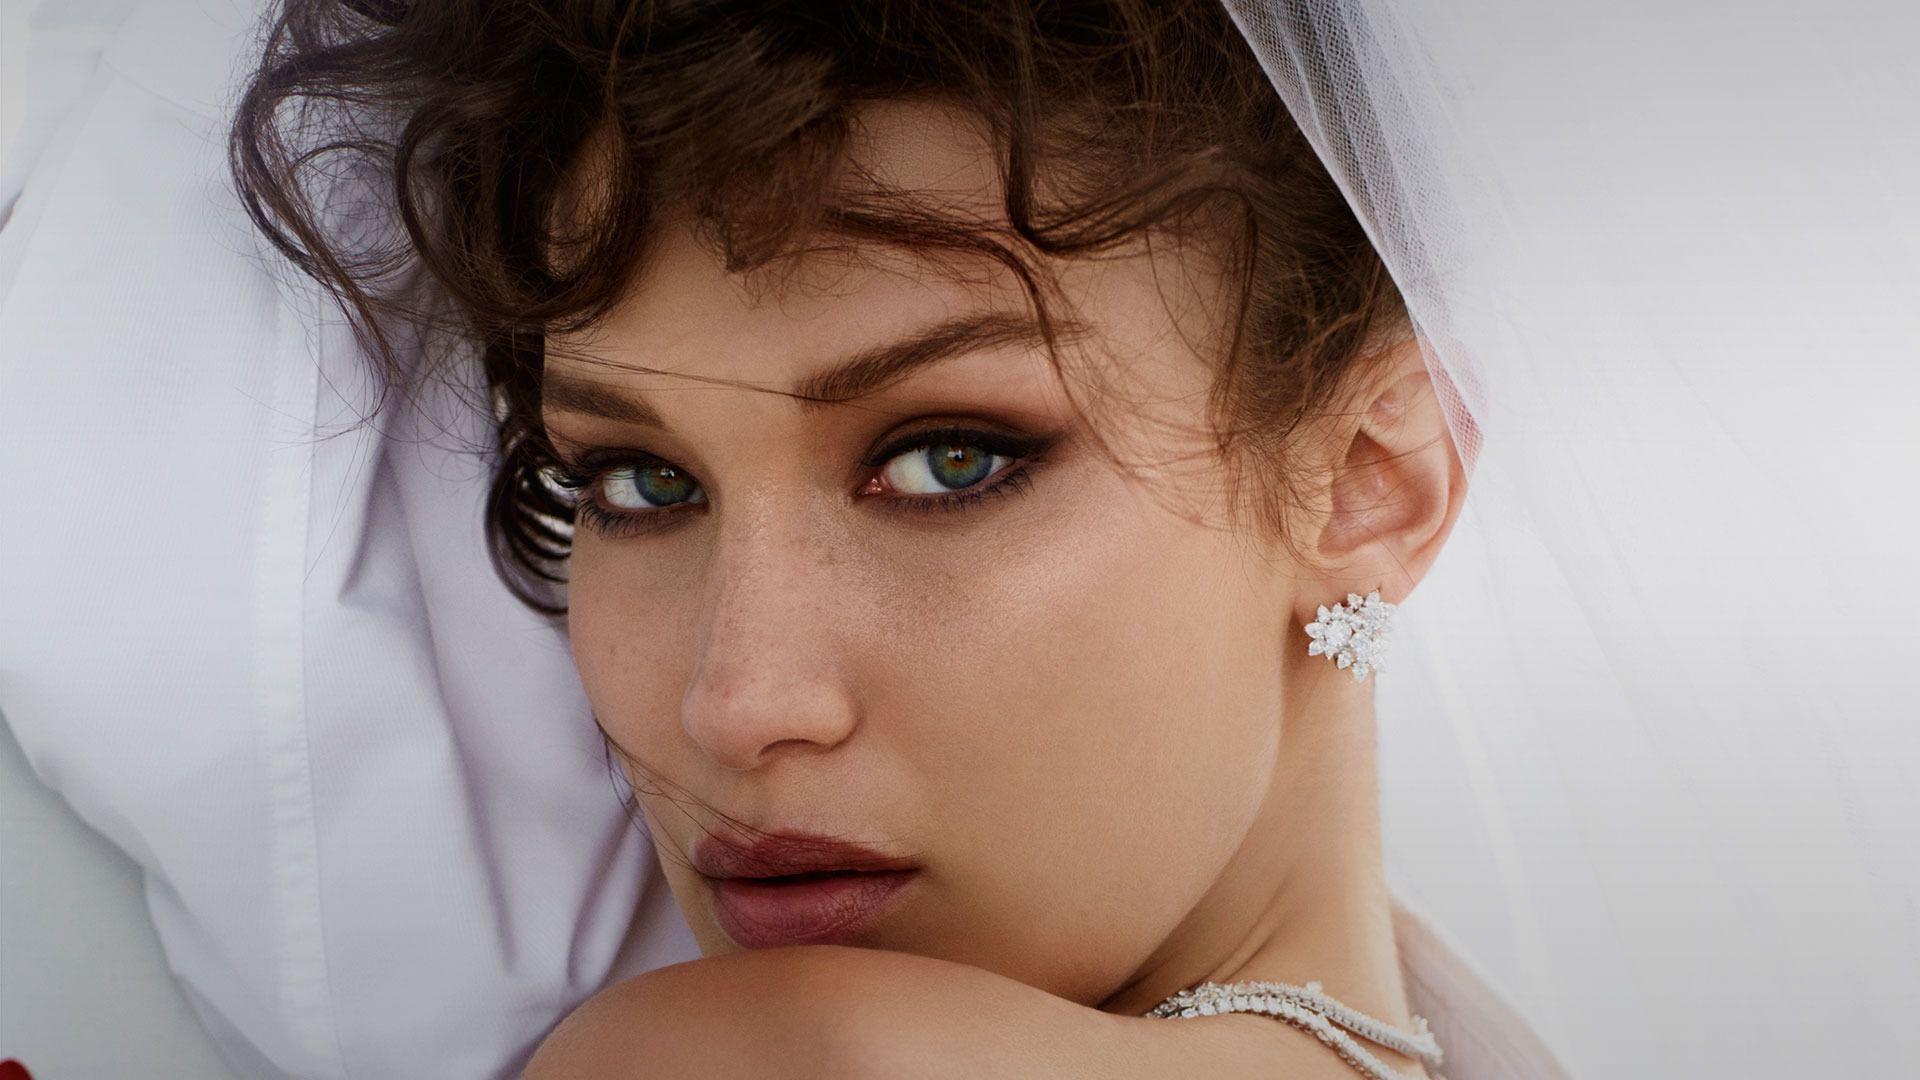 Bella Hadid Wallpapers Free Download for Phone - Best Wallpapers